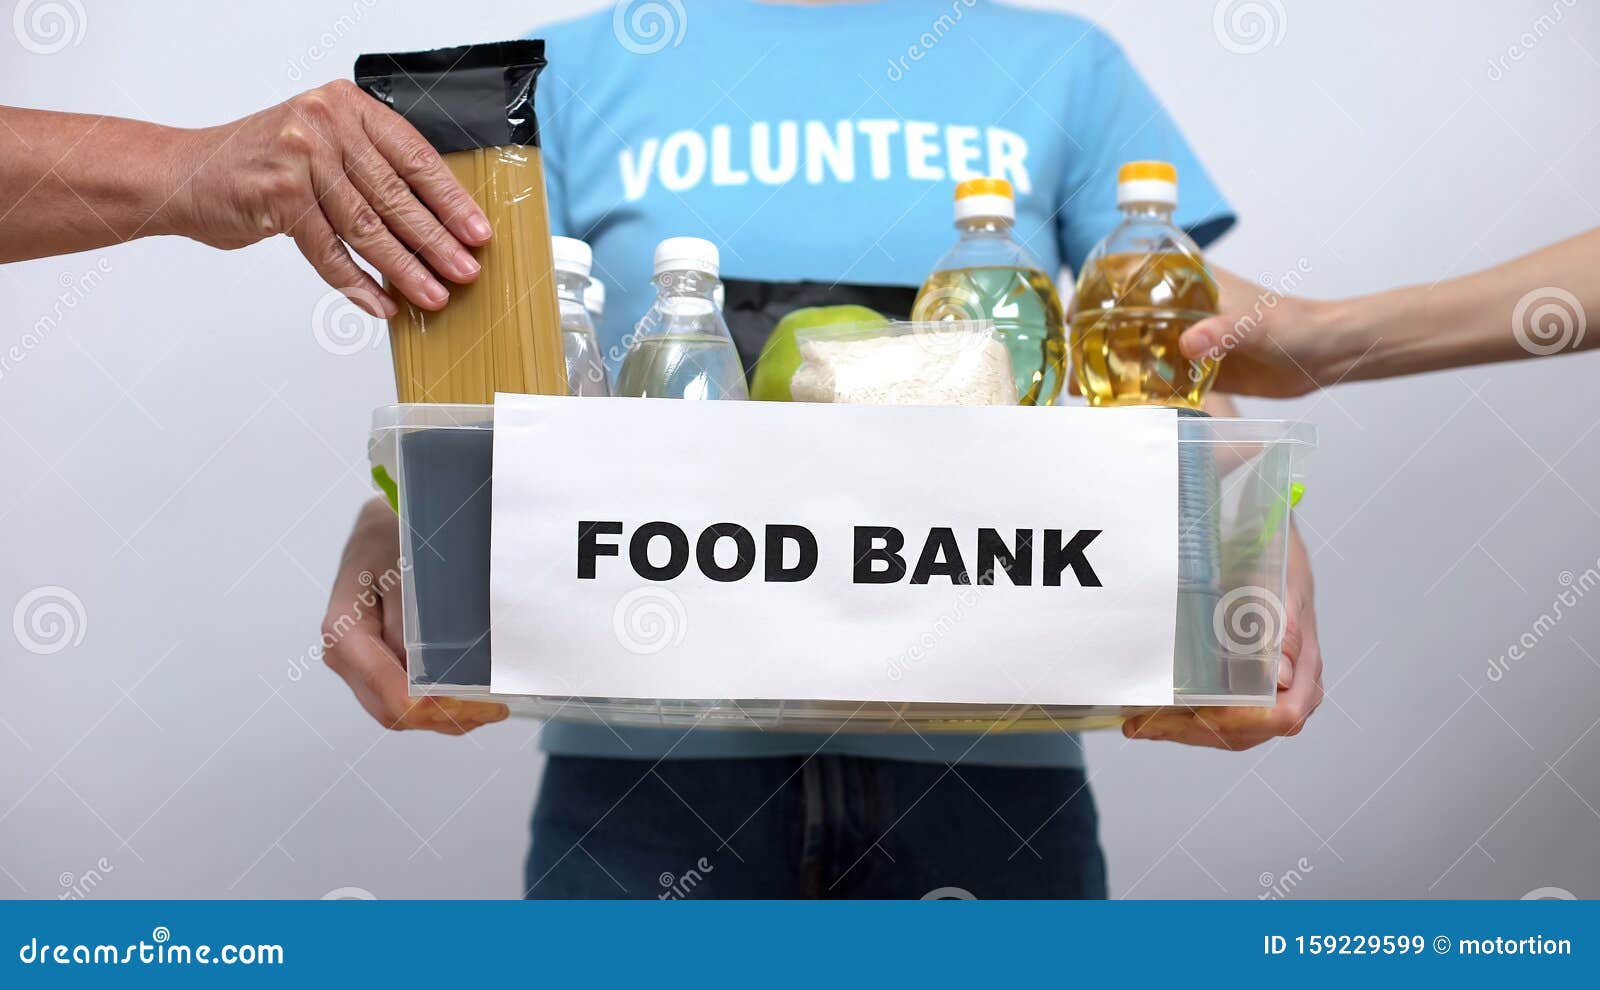 volunteer holding food bank container, hands putting provision in box, help